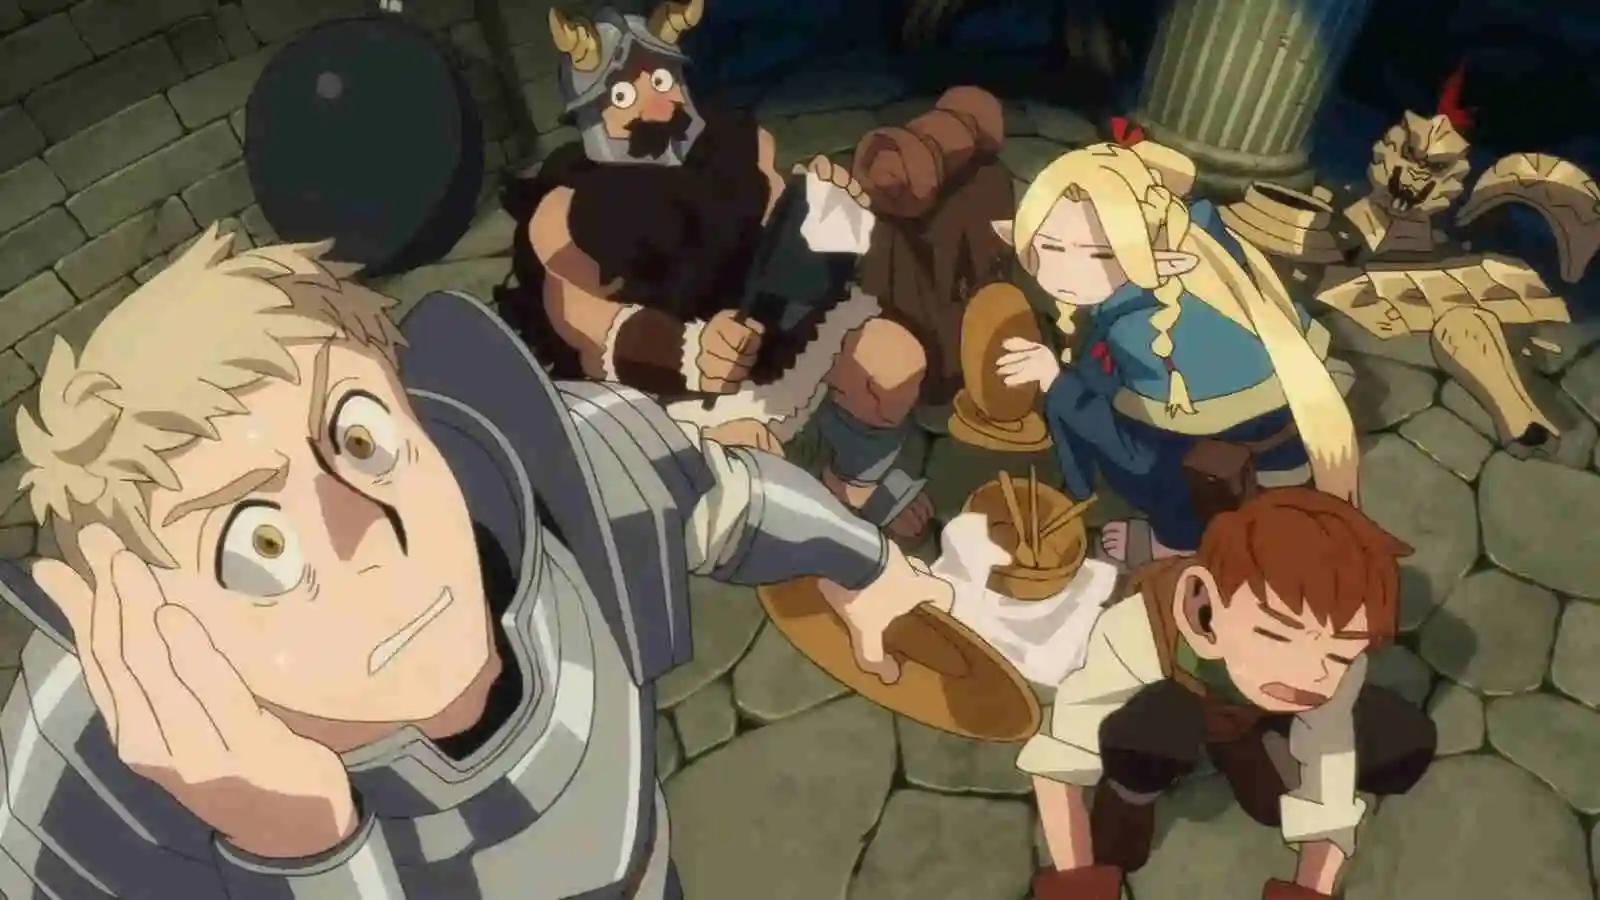 Delicious In Dungeon Episode 1 Recap, Summary and Explained